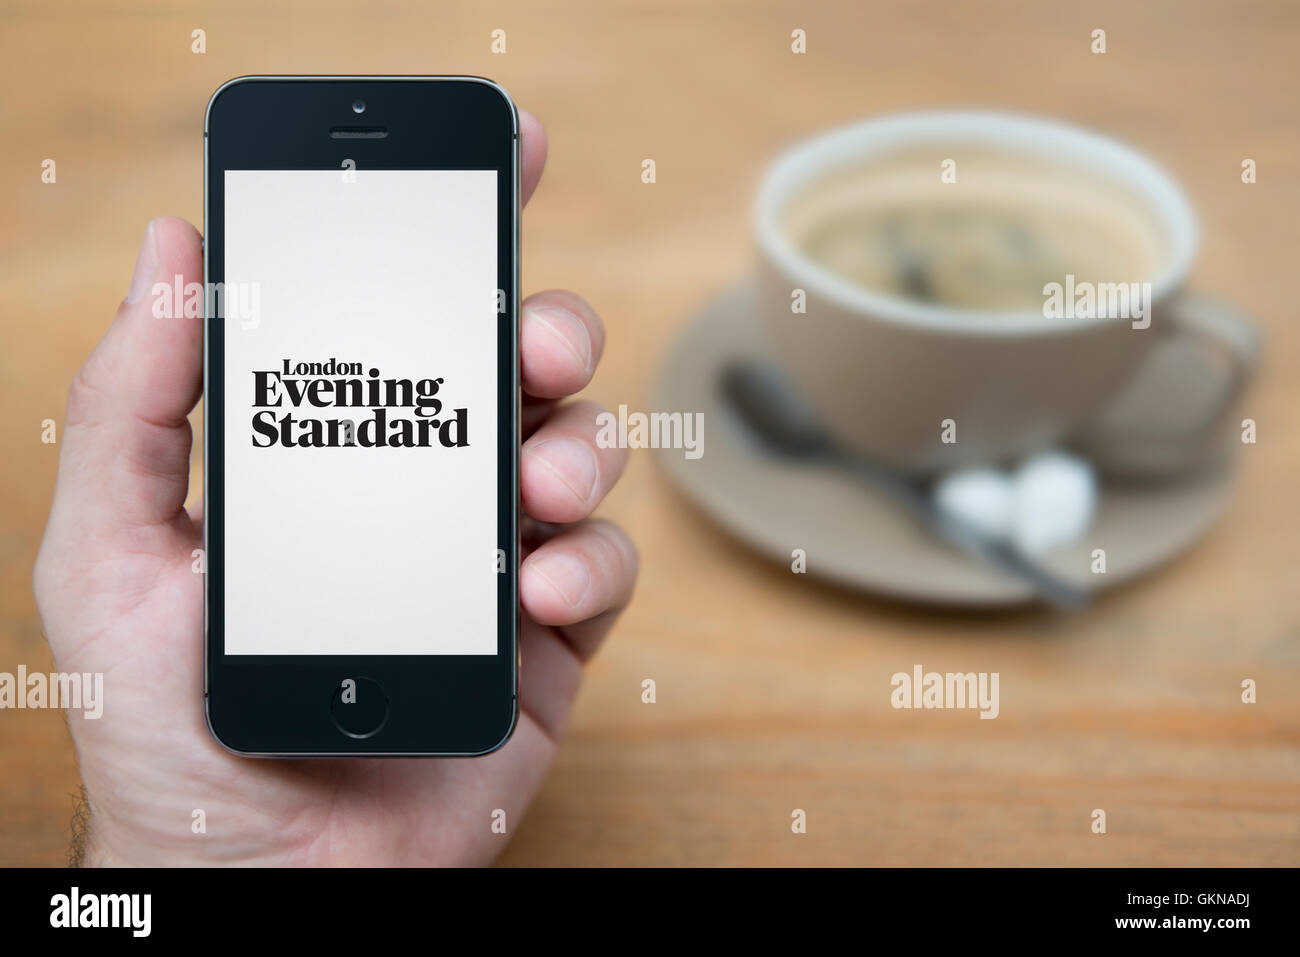 A man looks at his iPhone which displays the London Evening Standard logo, while sat with a cup of coffee (Editorial use only). Stock Photo